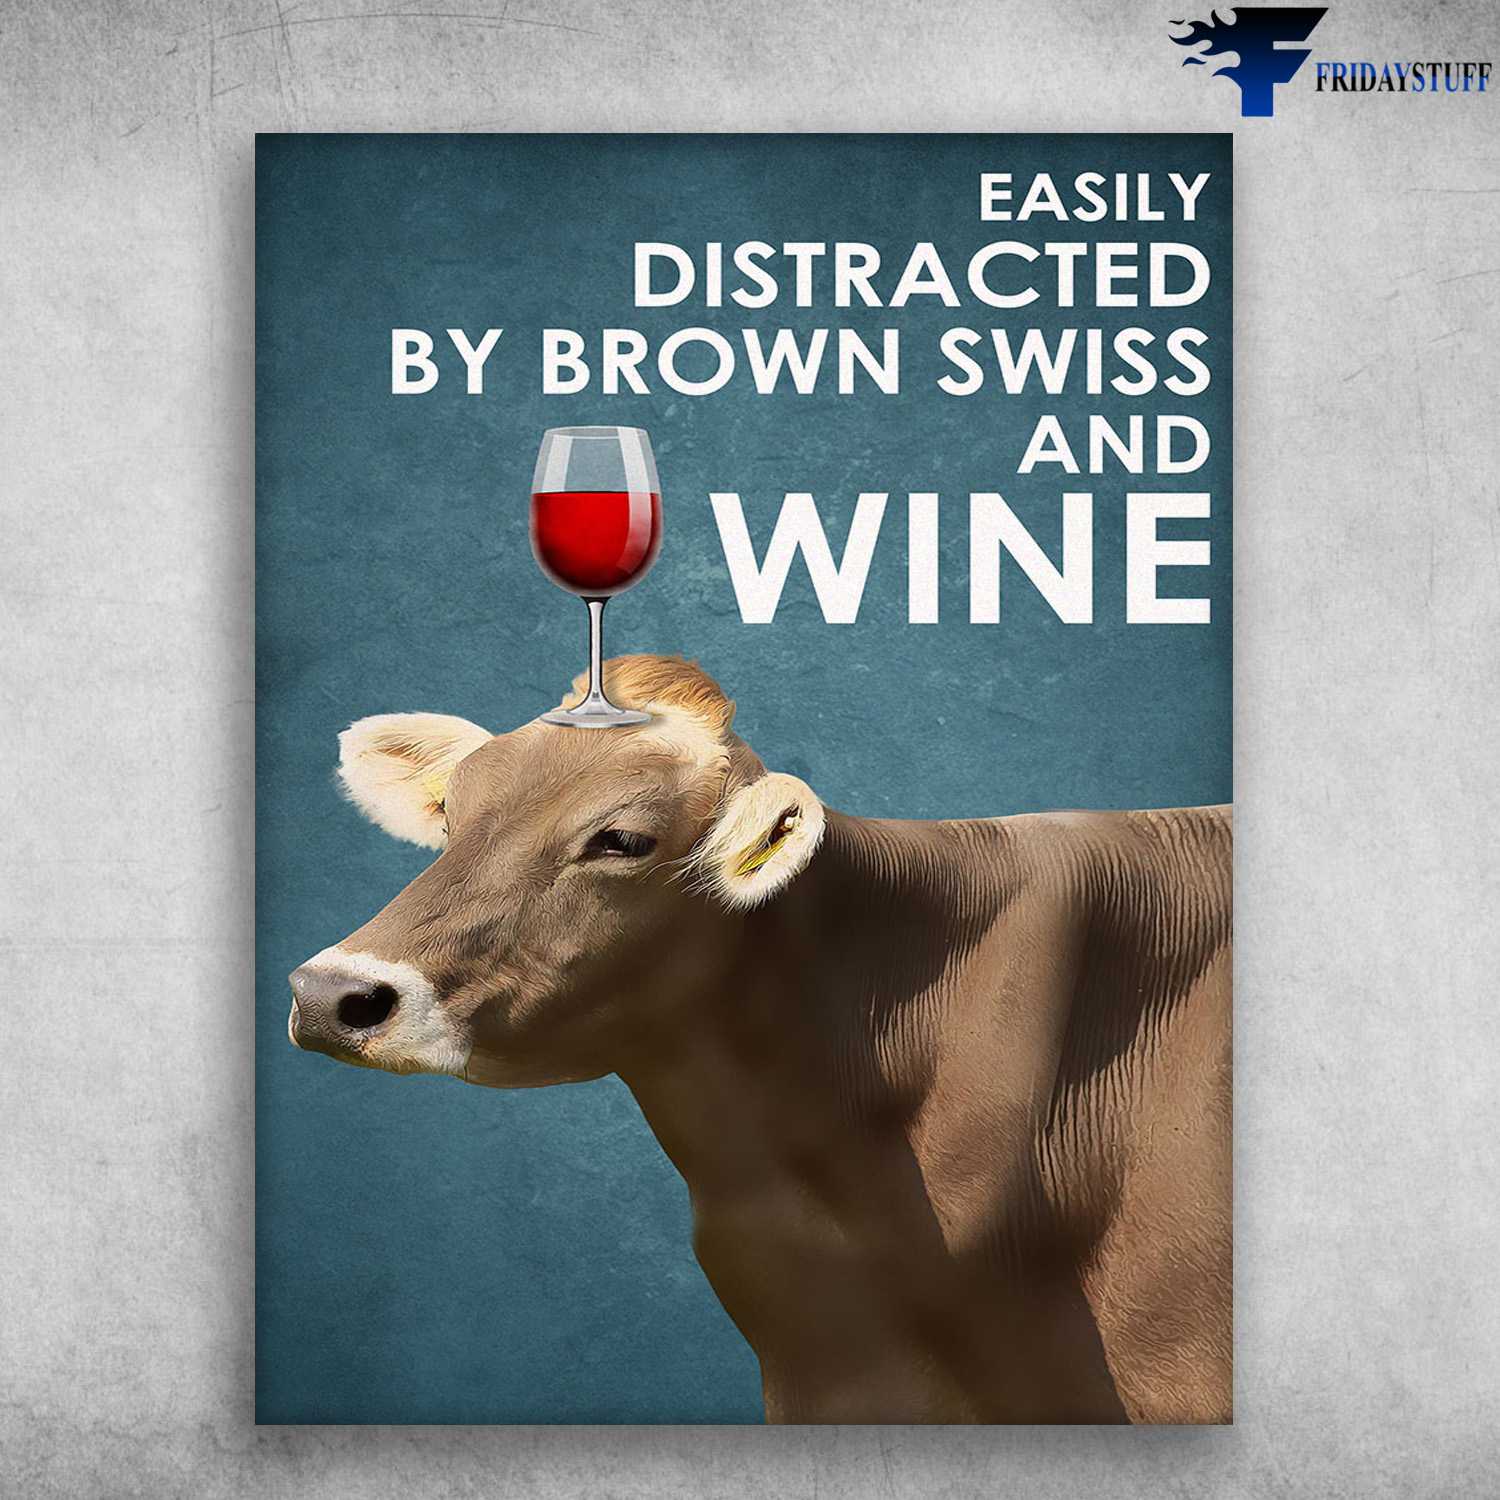 Cow And Wine, Wine Lover - Easily Distracted, By Brown Swiss And Wine